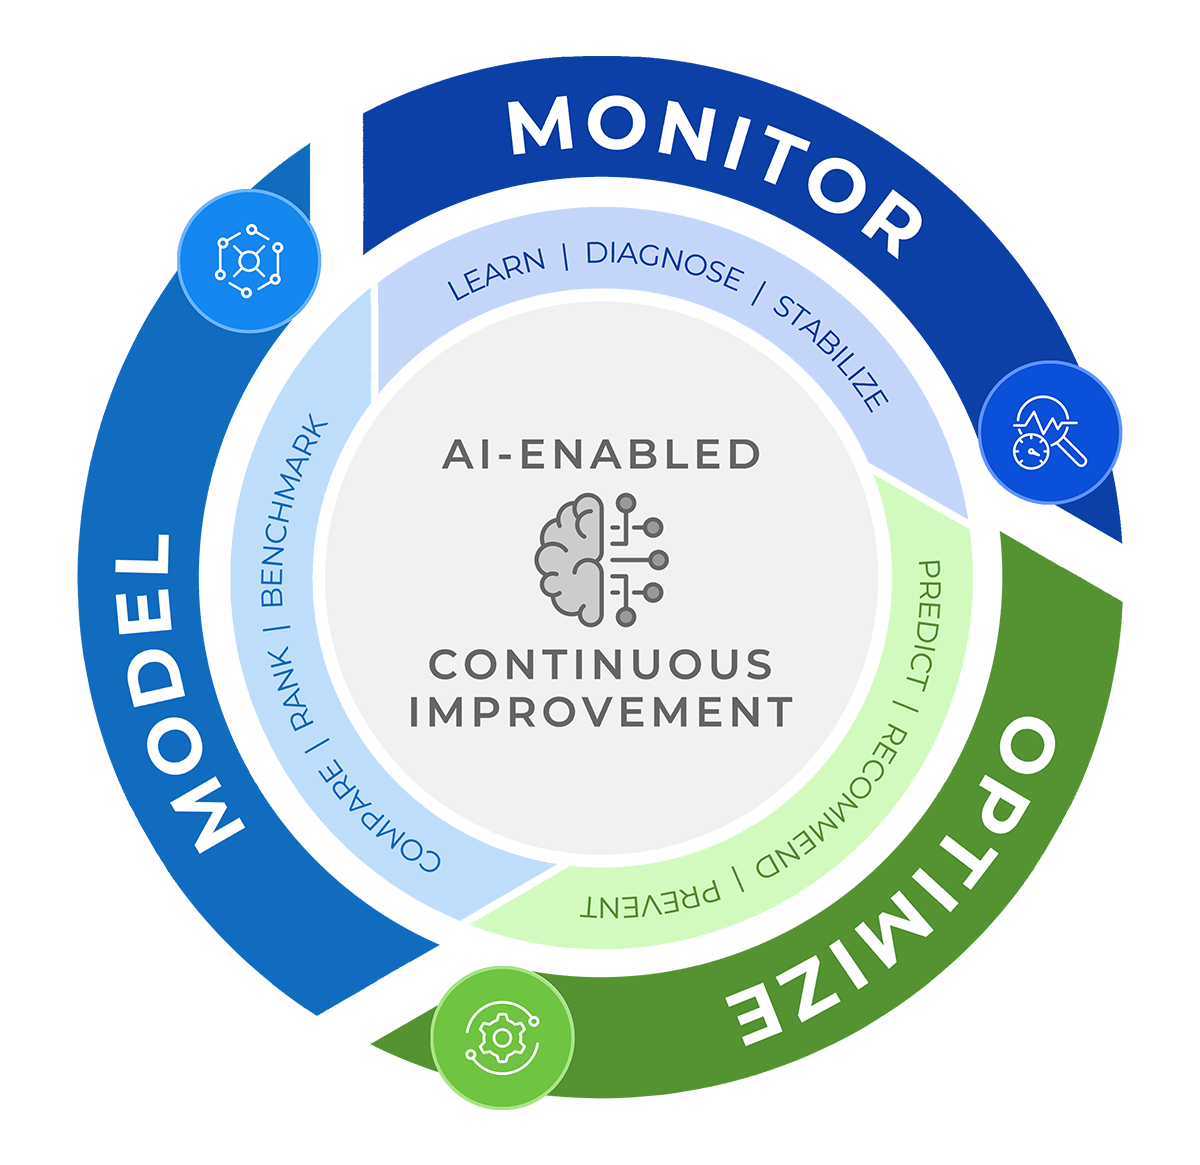 AI-Enabled Continuous Improvement Cycle (infographic)